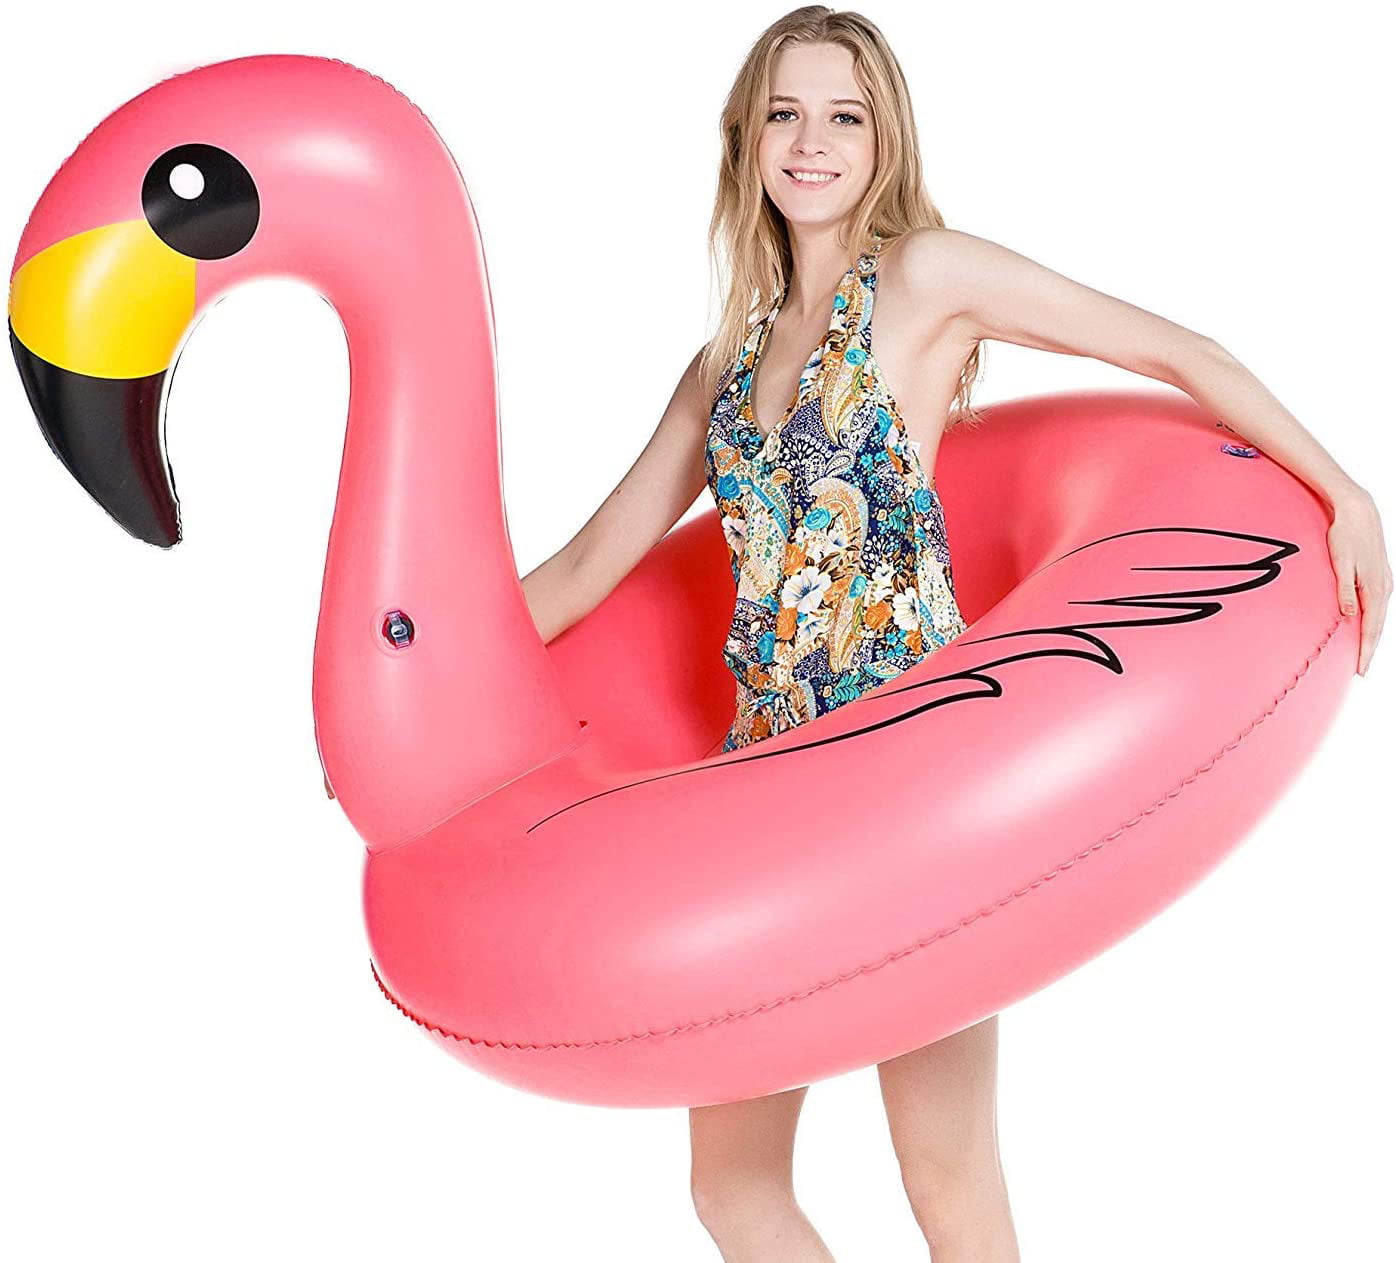 YYCYY Giant Inflatable Swimming Floating Pool Flamingo Swan Float Water Toy Parties Sea Beach for Adults Pink 192x180x115cm 